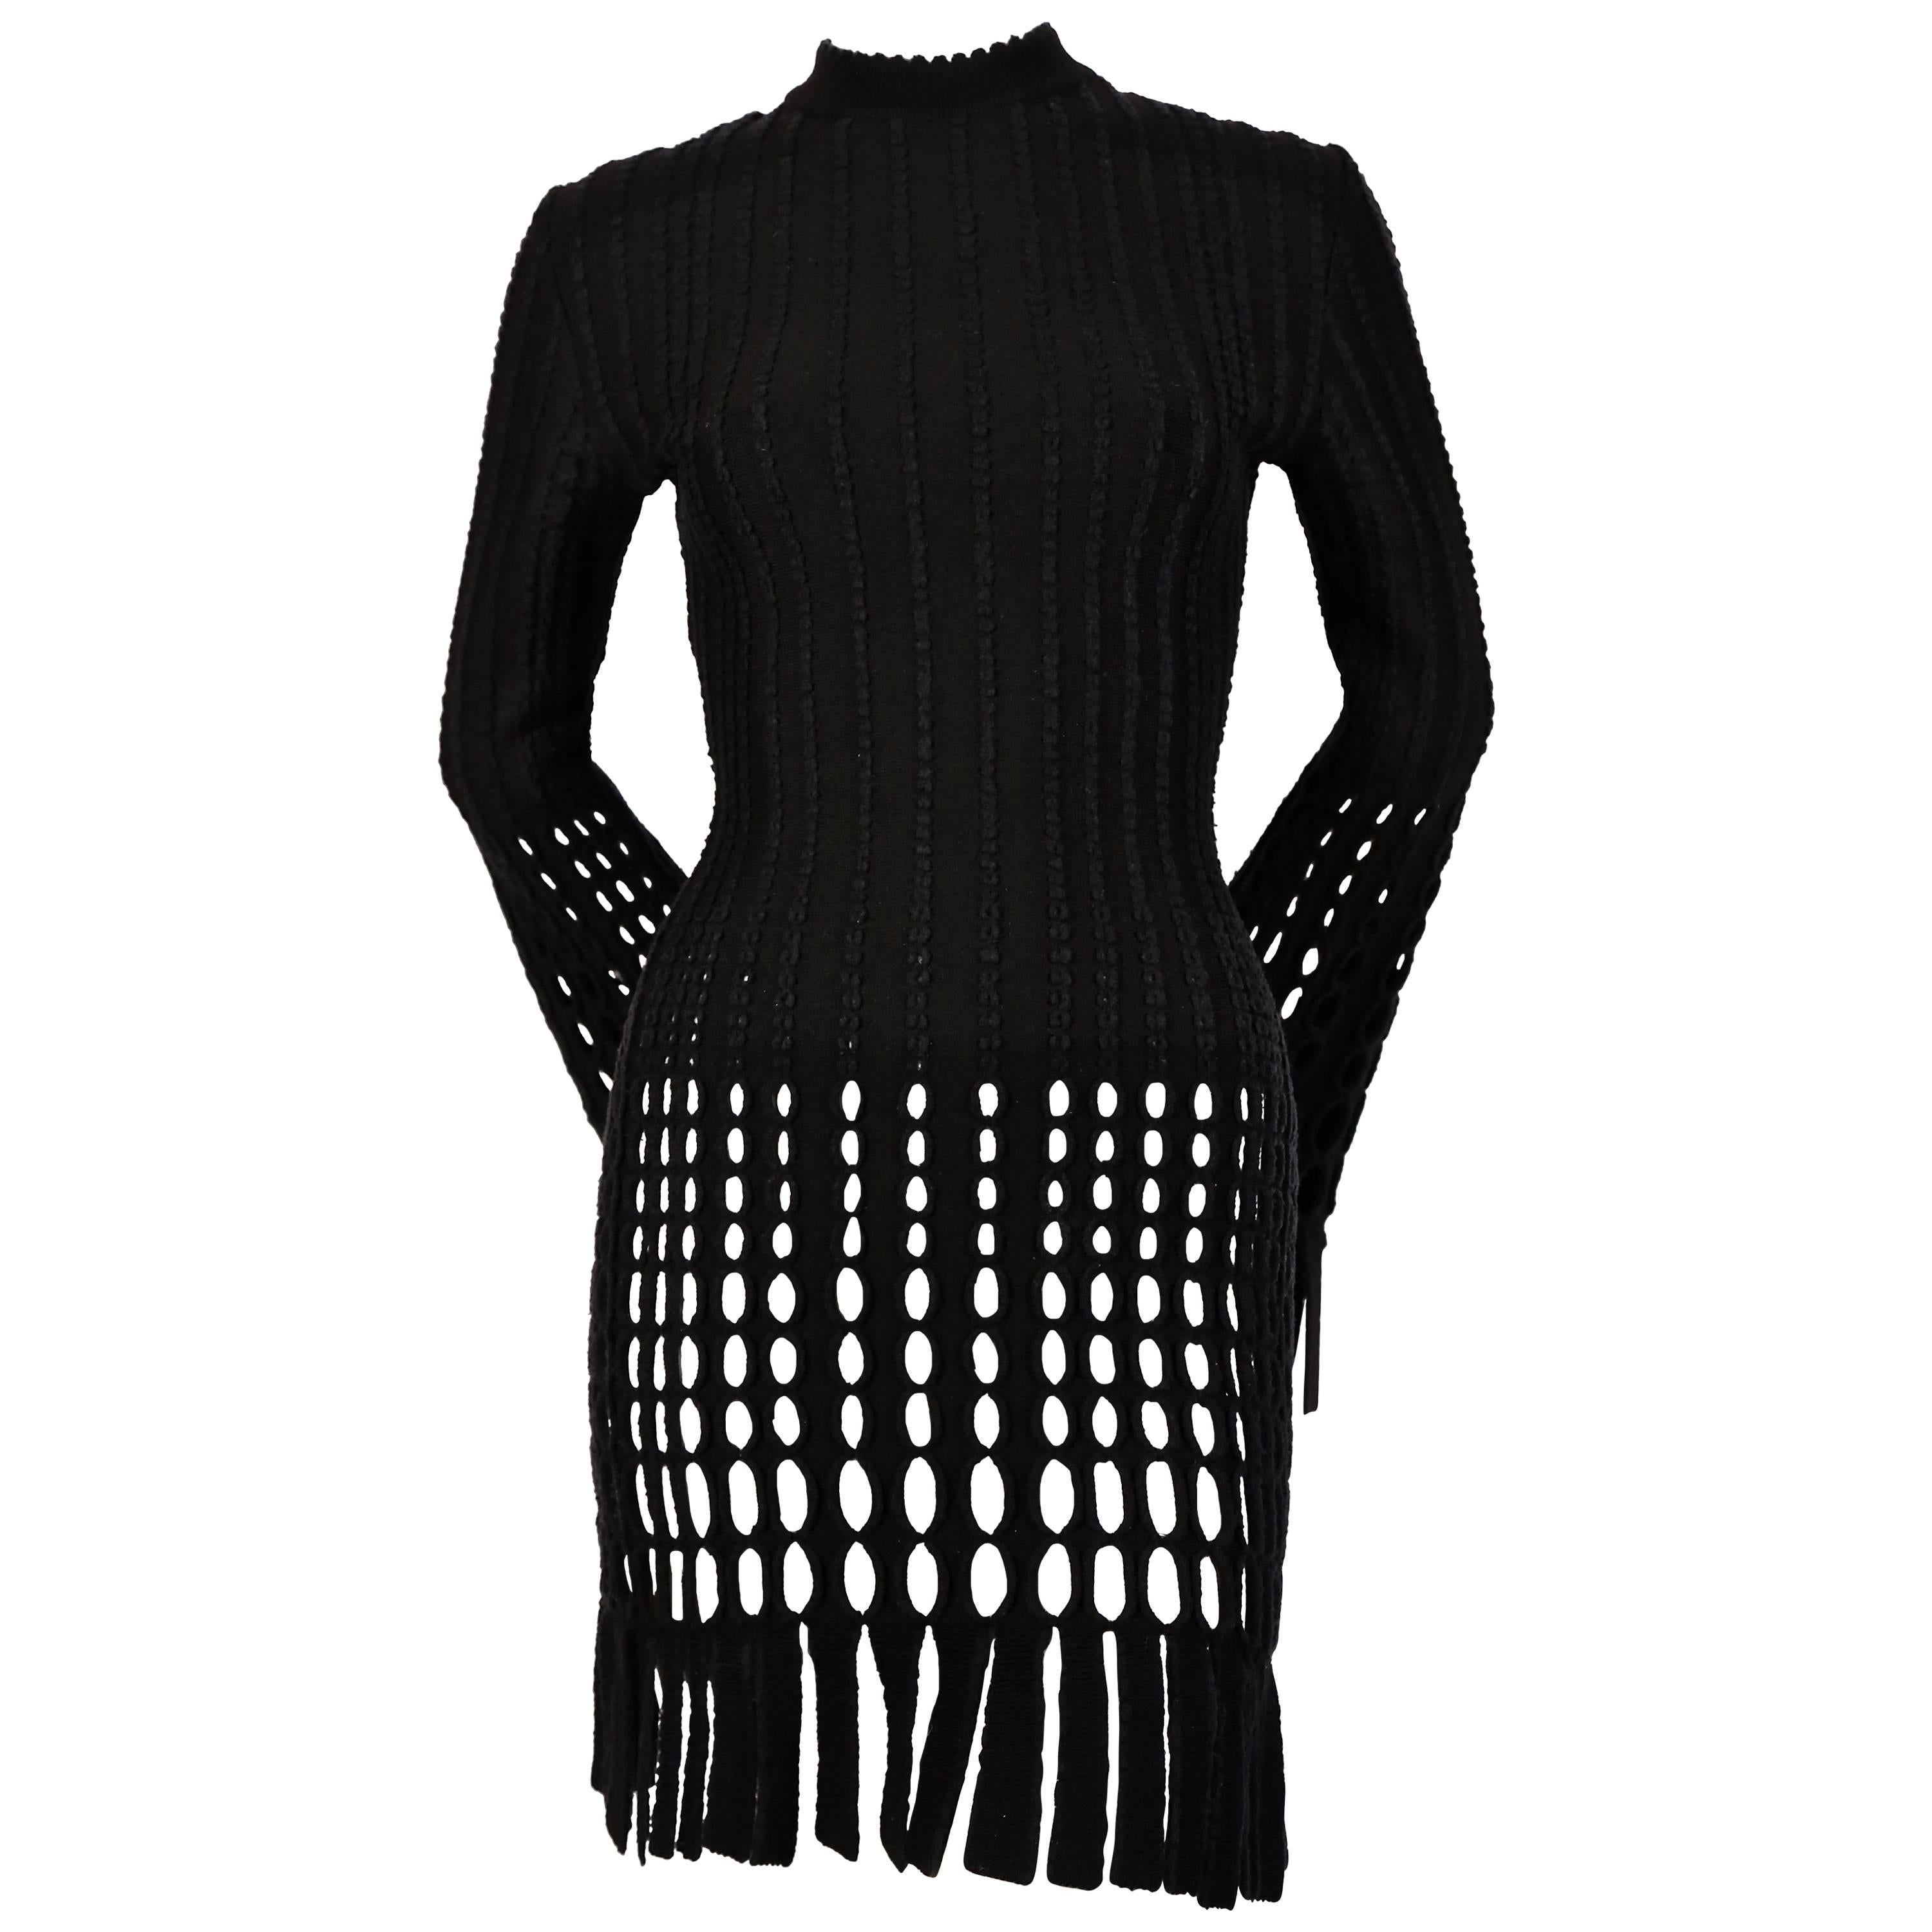 1991 AZZEDINE ALAIA black and navy blue accented fringed mini dress 